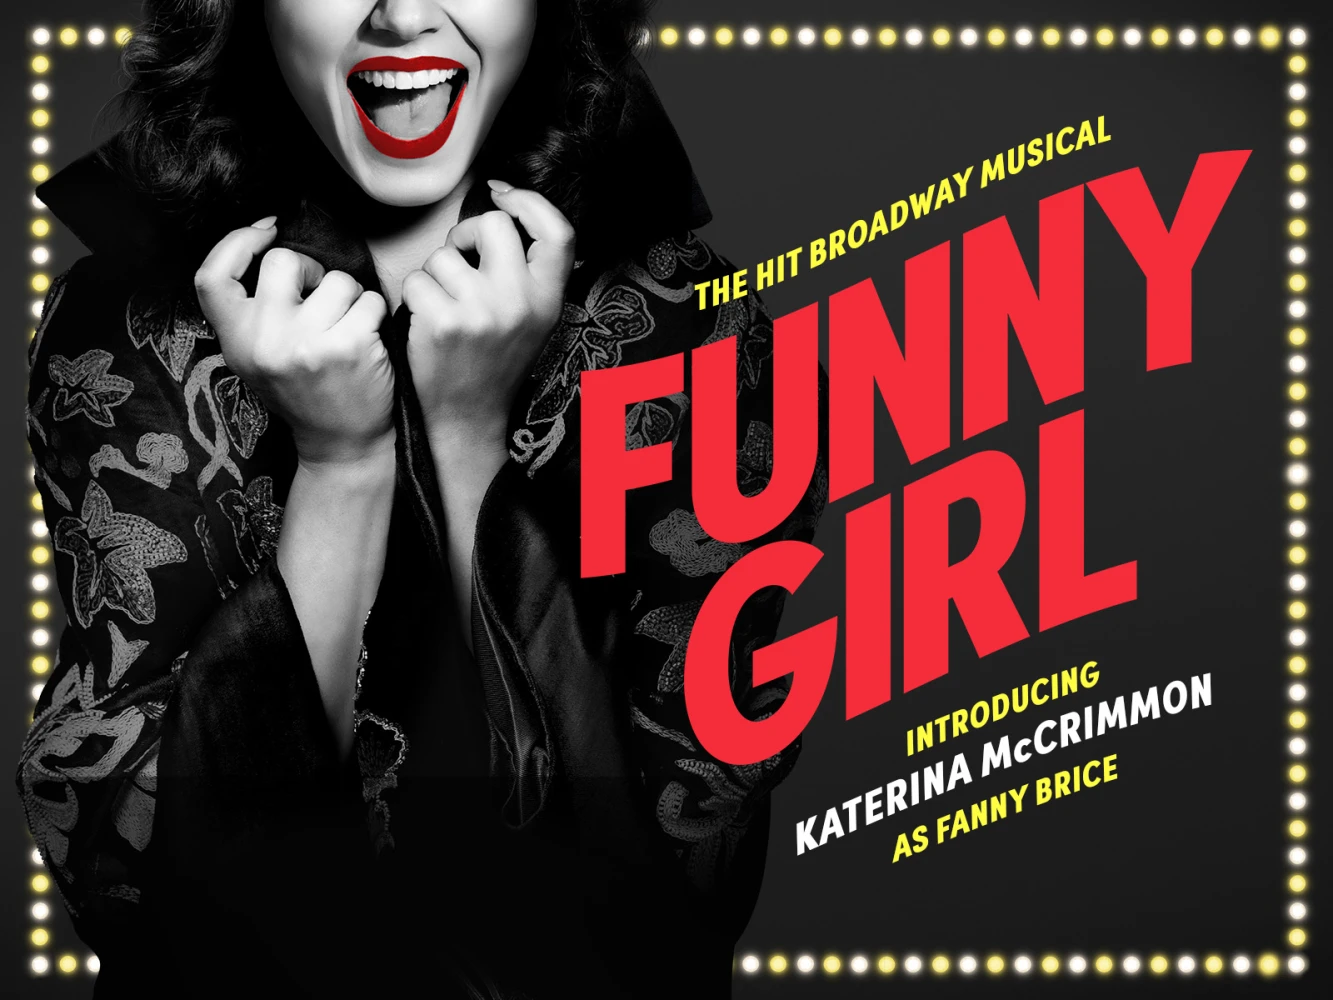 Funny Girl at the Ahmanson: What to expect - 2